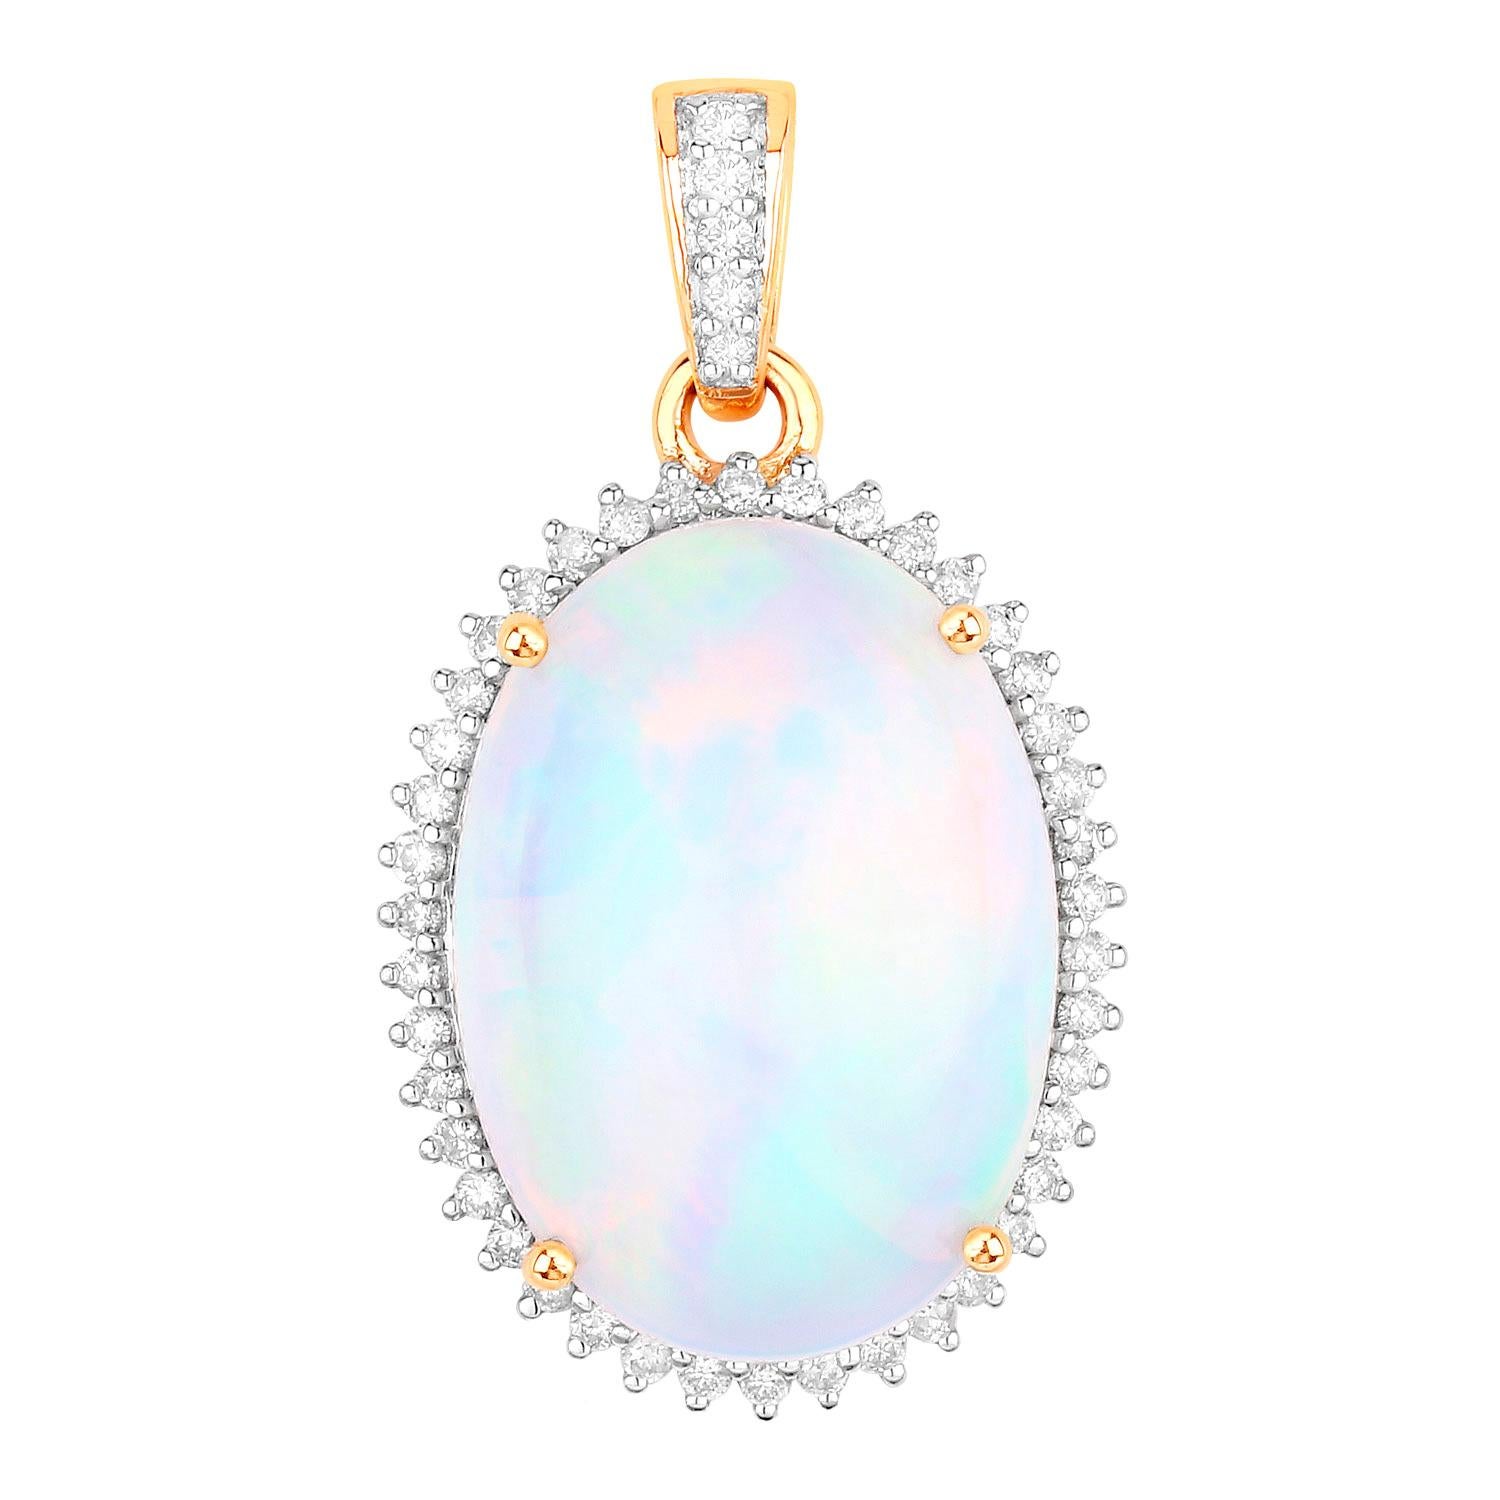 Cabochon Natural Opal Pendant Necklace Diamond Setting 7.08 Carats 14K Yellow Gold For Sale